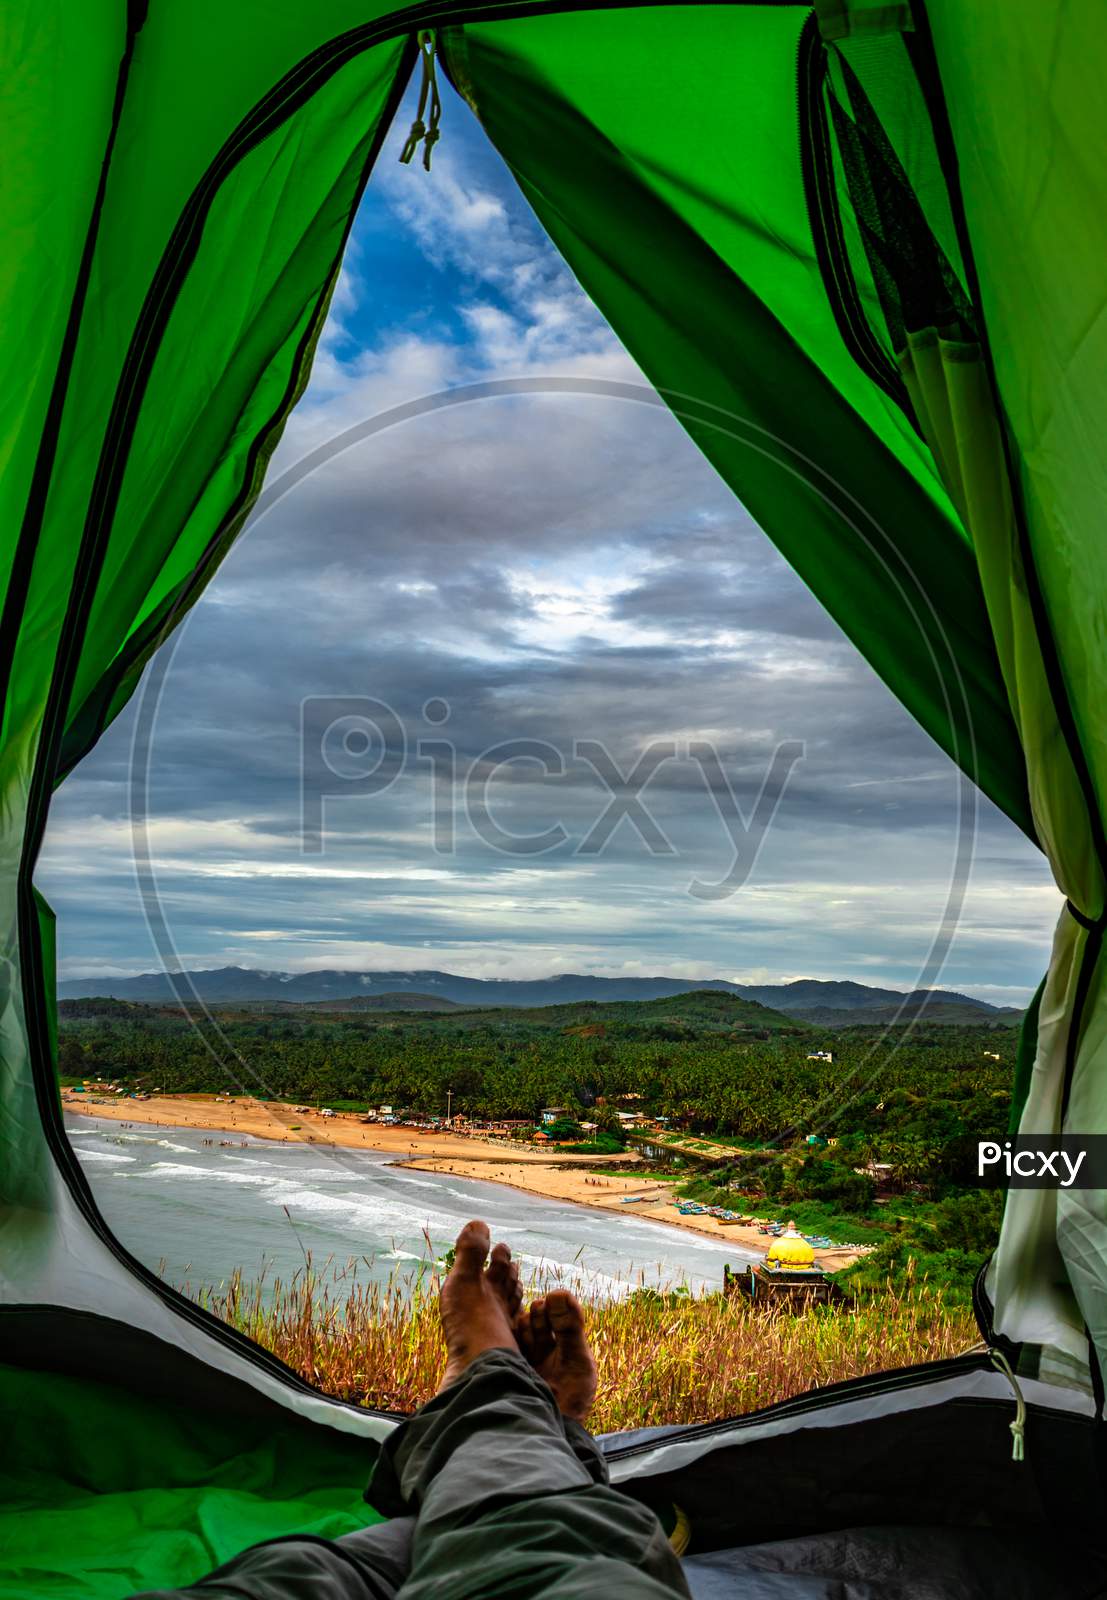 Man At Camping Tent Inside View Of Amazing Landscape Sea Shore